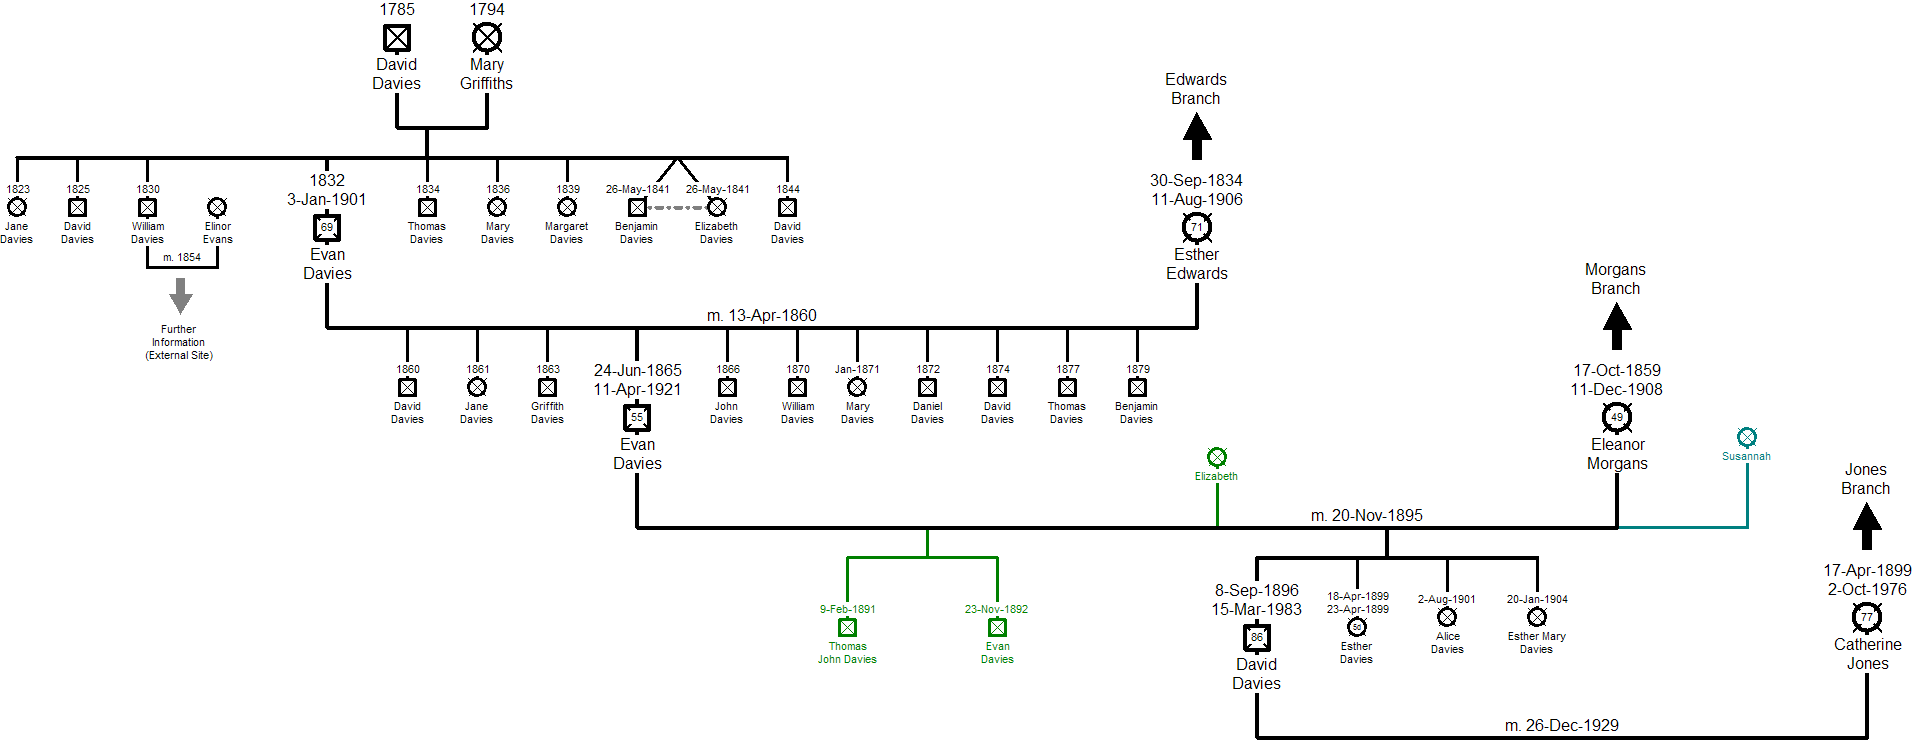 Family Tree of the Davies Branch